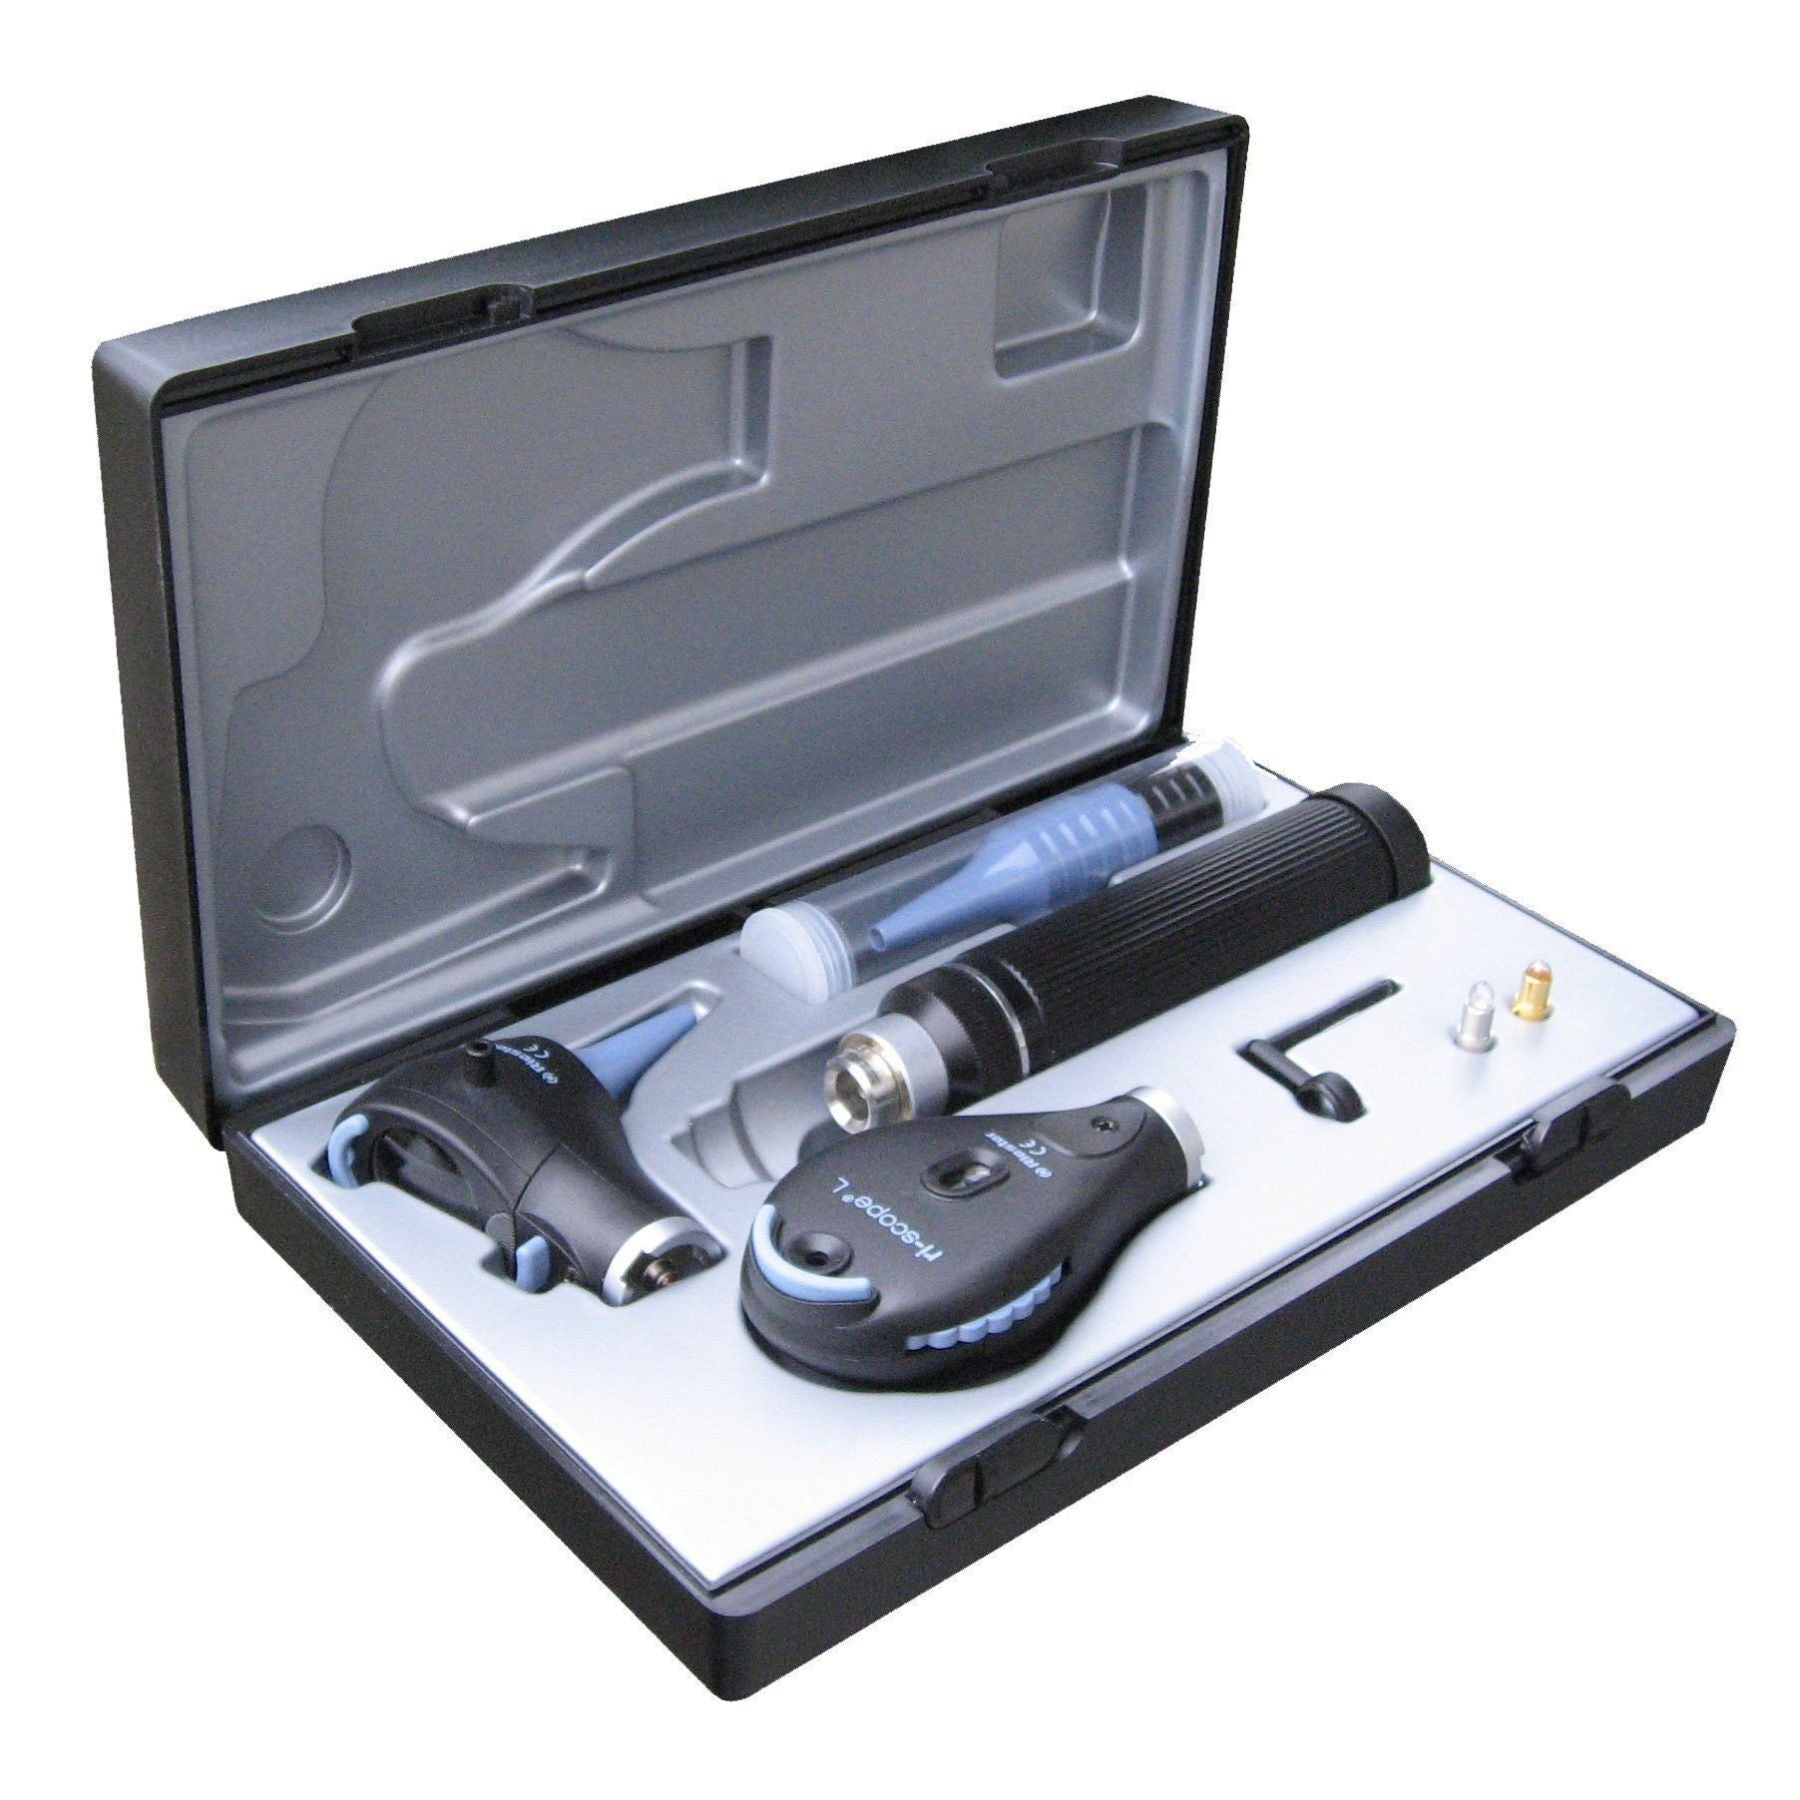 Riester Ri-Scope L Otoscope / Ophthalmoscope L2/L2 LED 3.5 V, Type C Handle